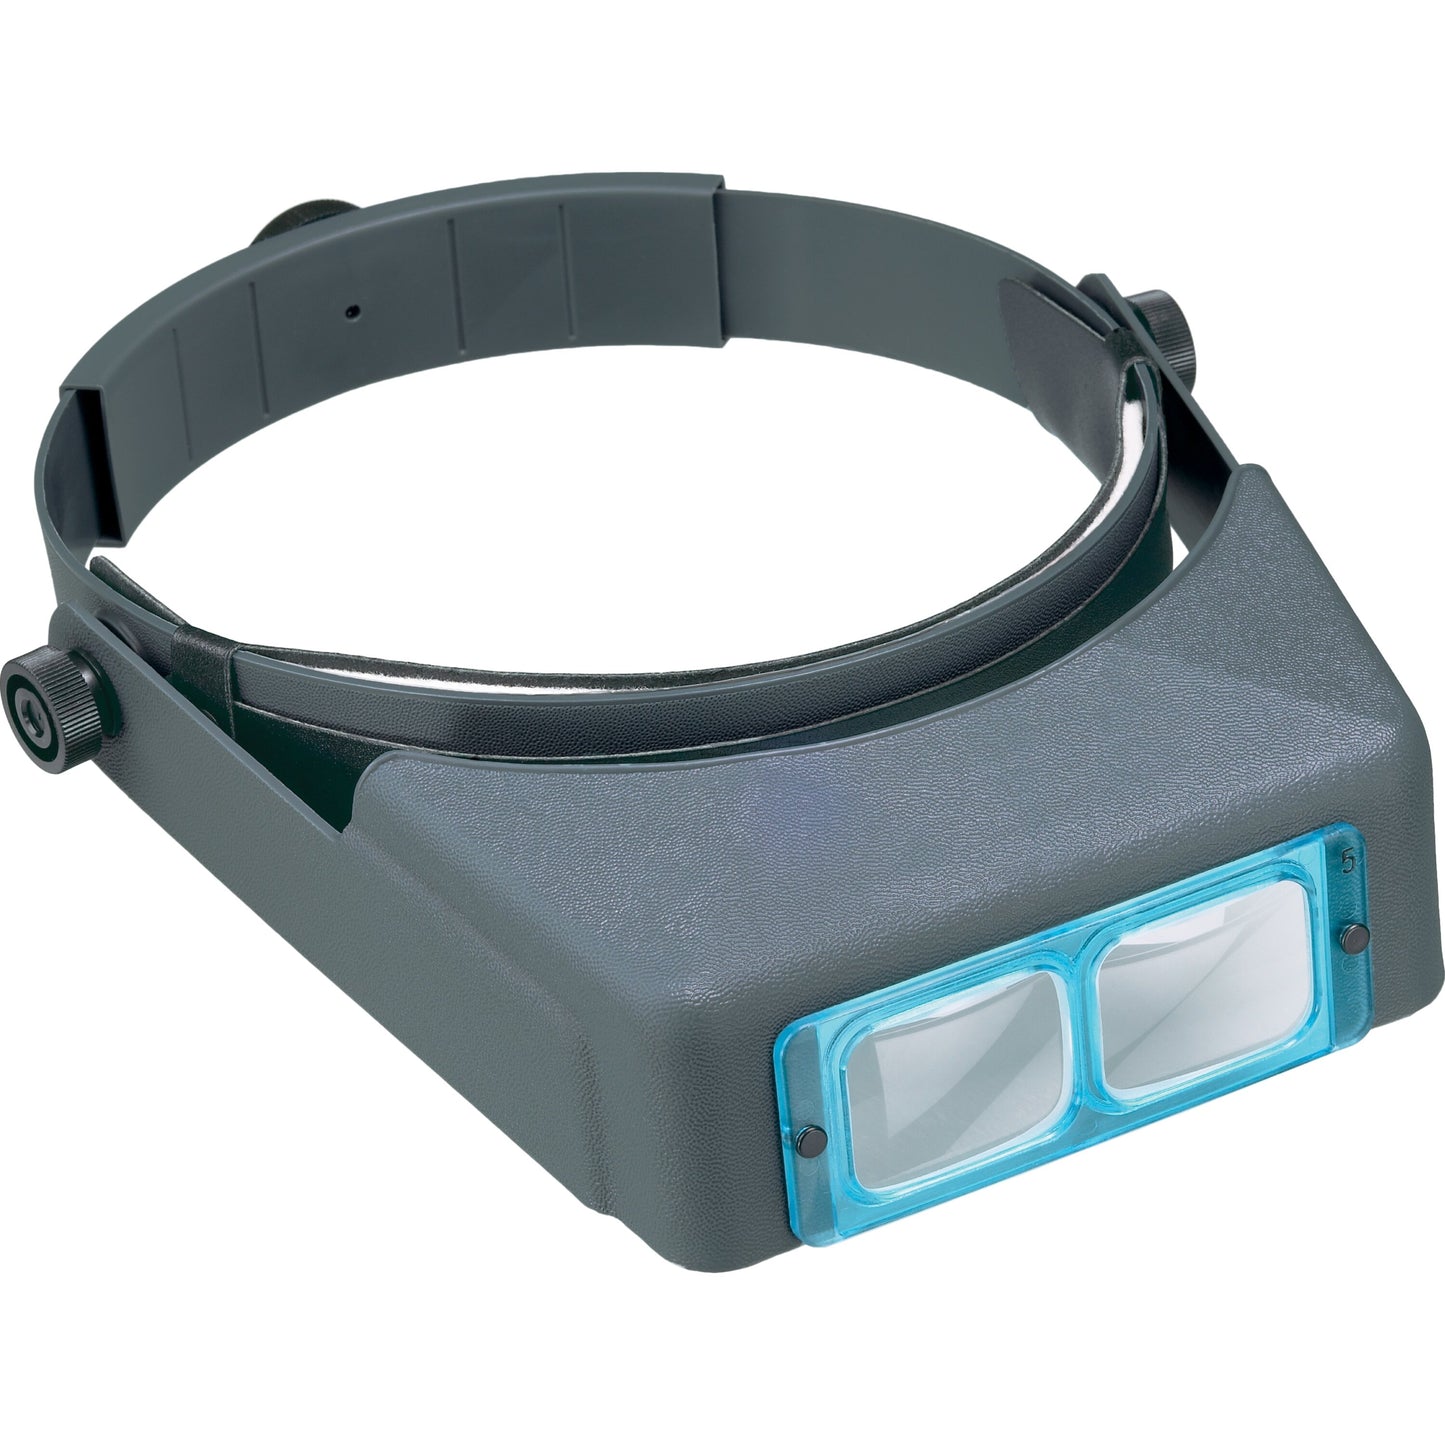 Donegan Optical 3.5X OptiVisor Headset Magnifier for Jewelers